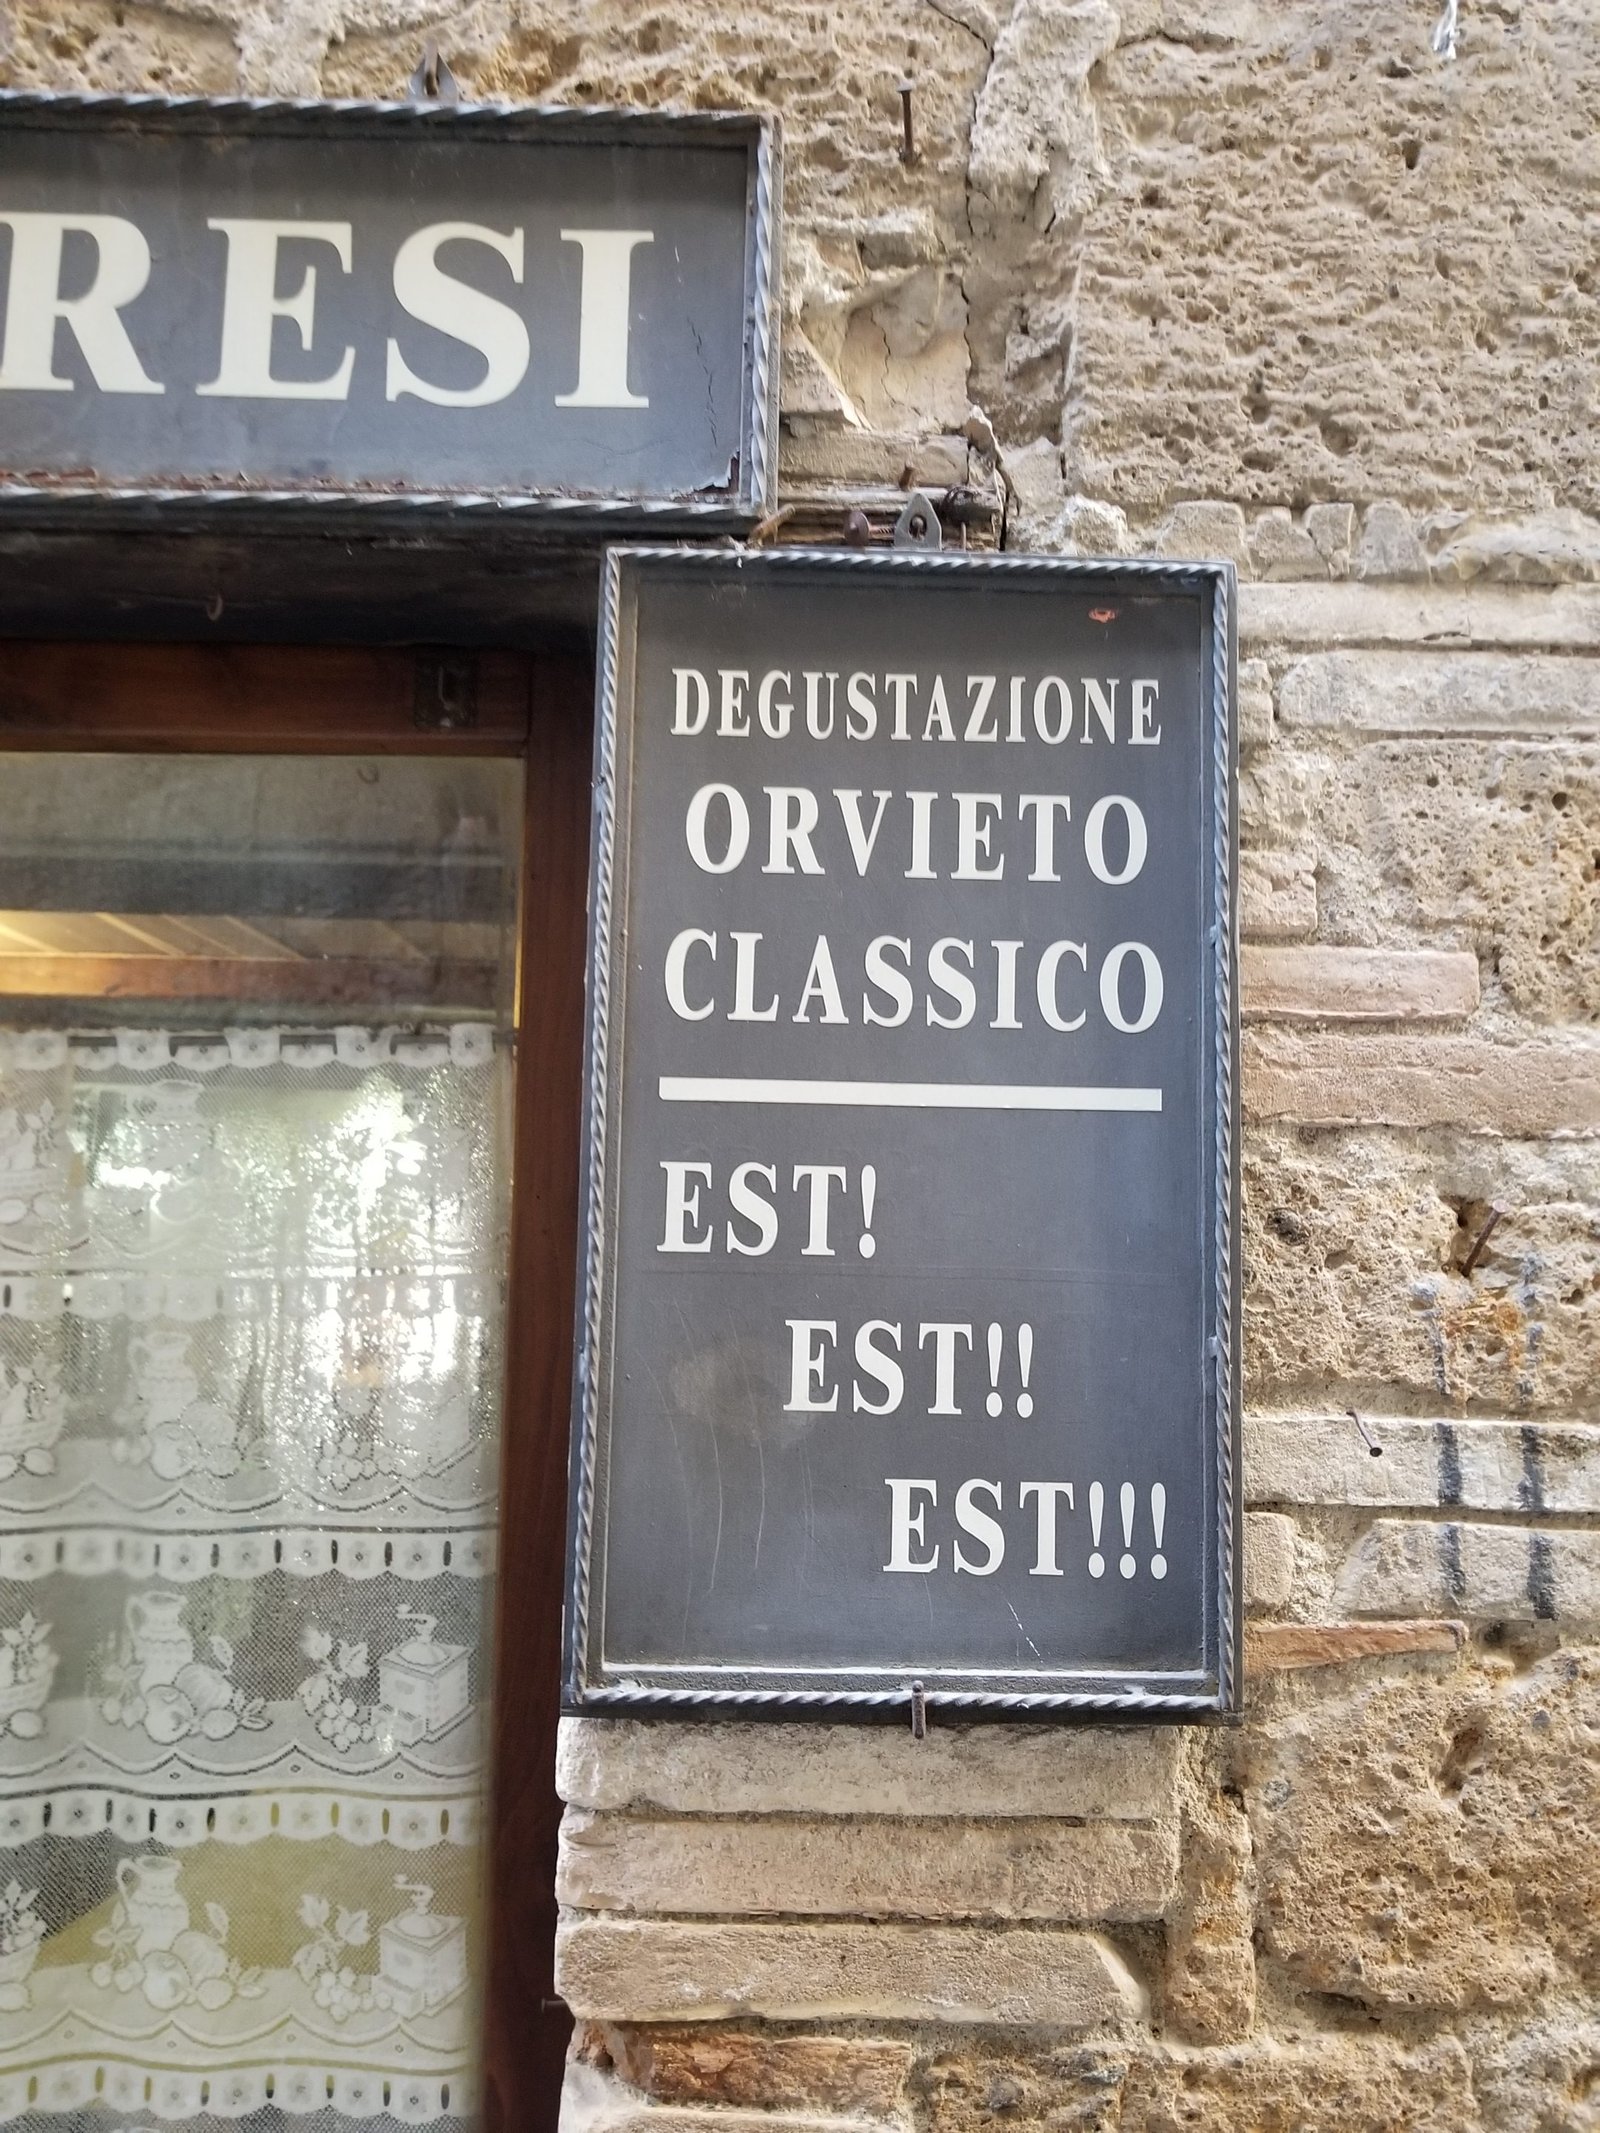 famous wine of Orvieto, Discover the old Etruscan city and its hidden treasures in Orvieto, ouritalianjourney.com